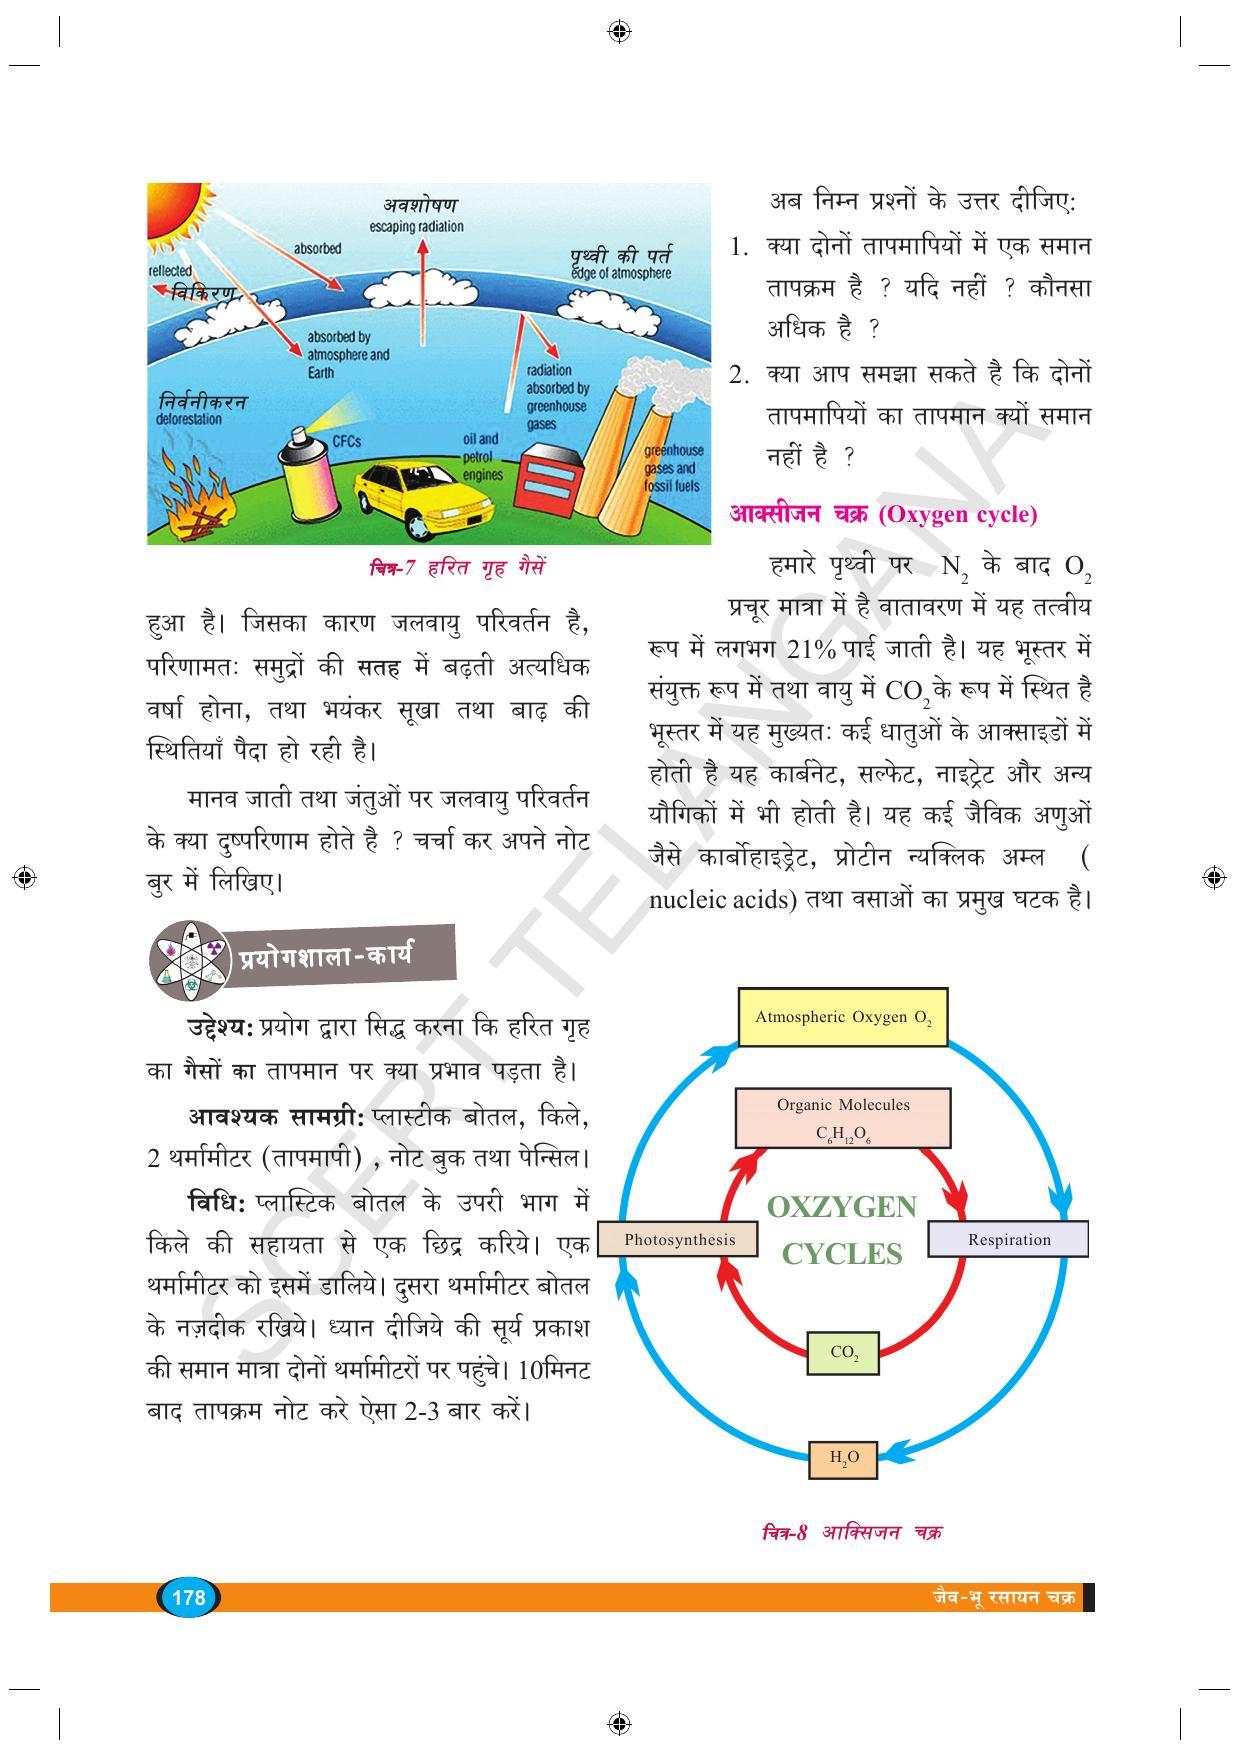 TS SCERT Class 9 Biological Science (Hindi Medium) Text Book - Page 190